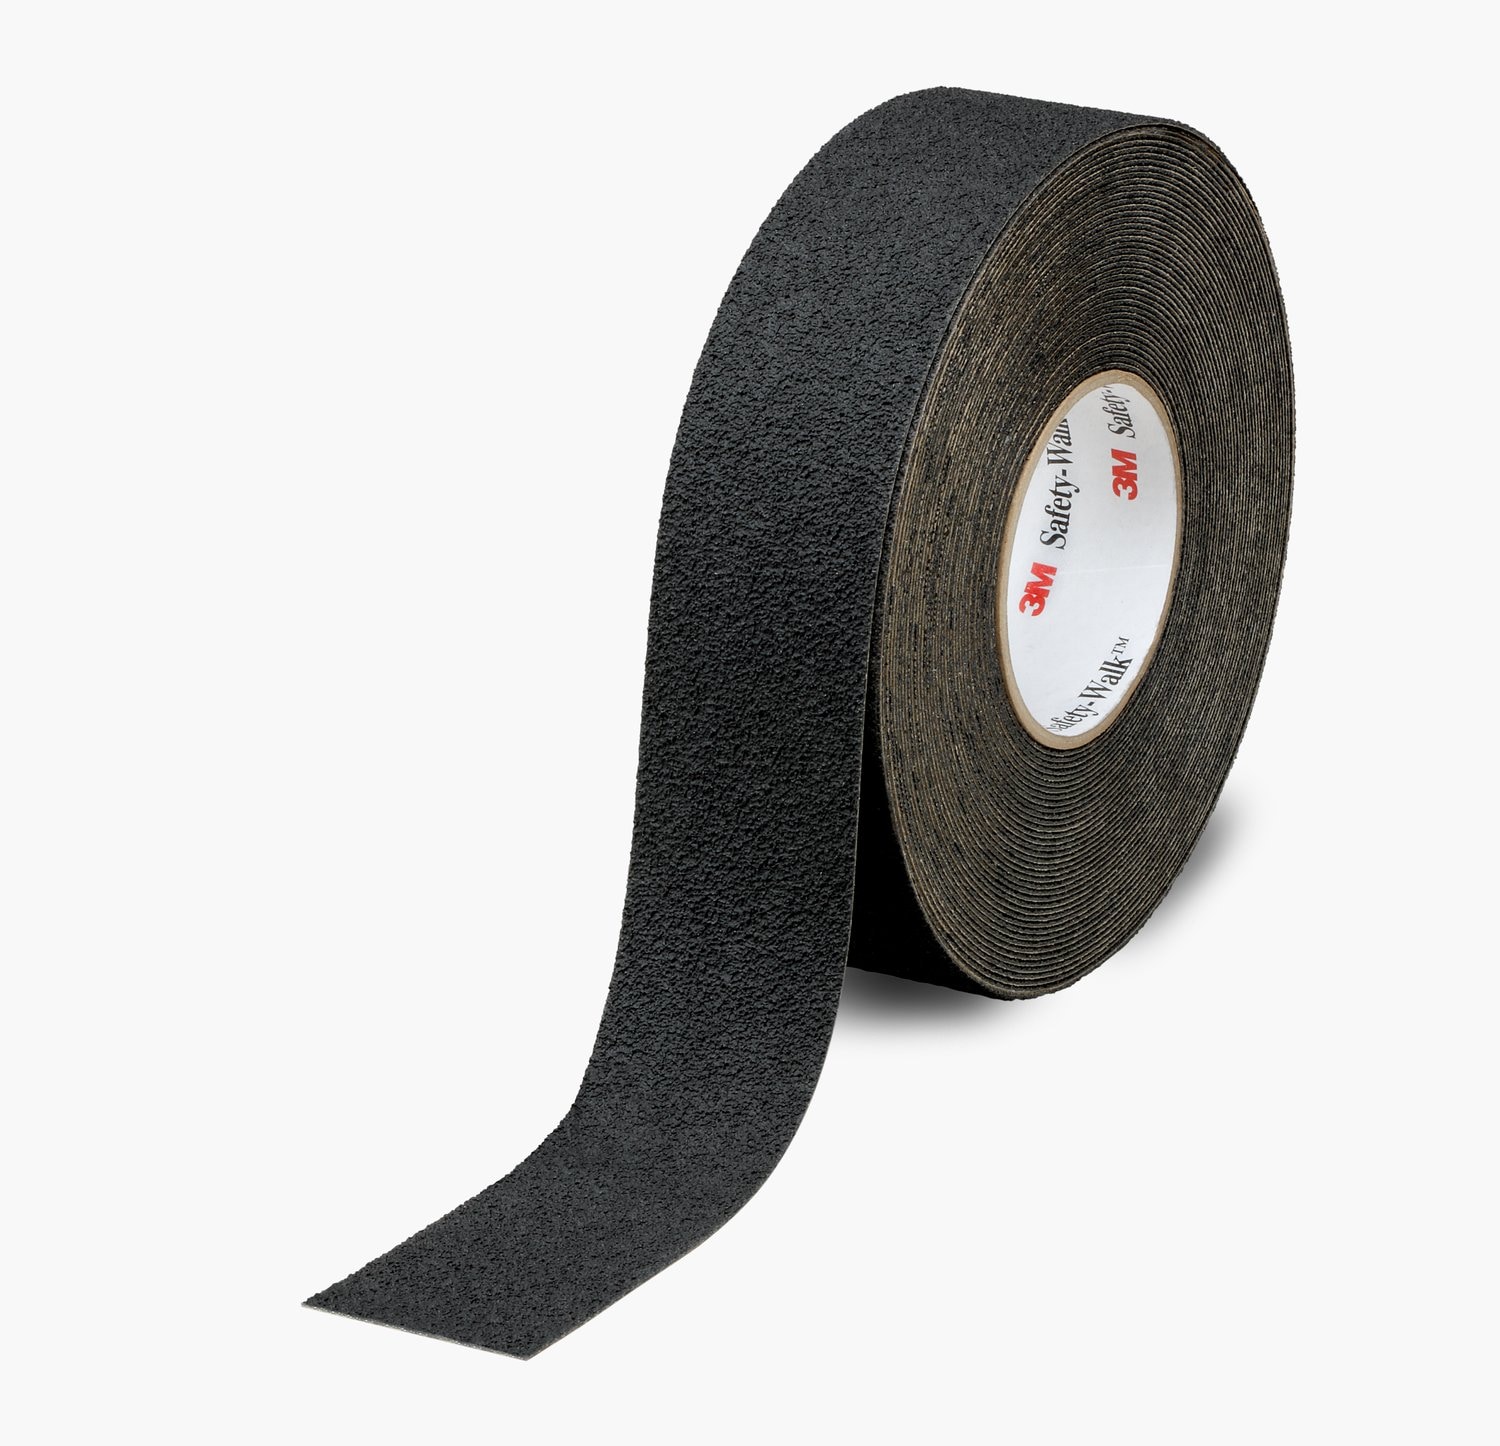 7000126120 - 3M Safety-Walk Slip-Resistant Medium Resilient Tapes and Treads 300,
Black, 305 mm x 18 m, 1 Roll/Case